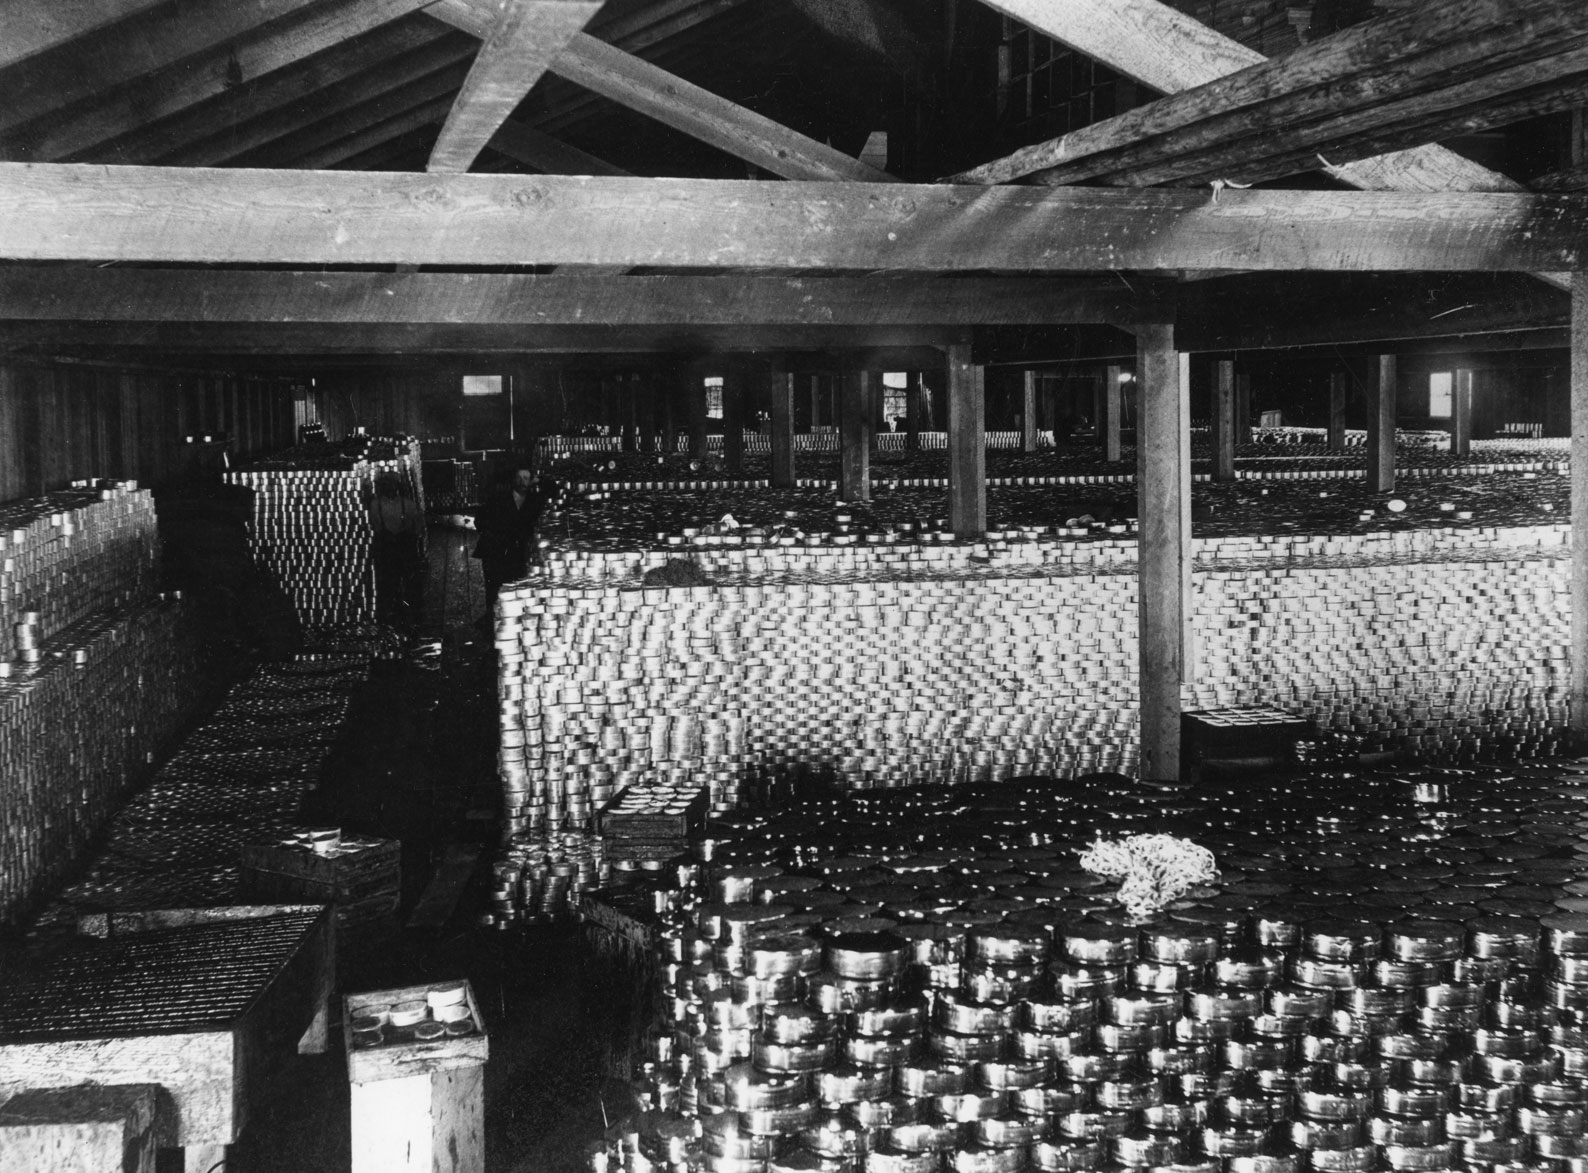 Stacks of canned salmon inside the Britannia Cannery